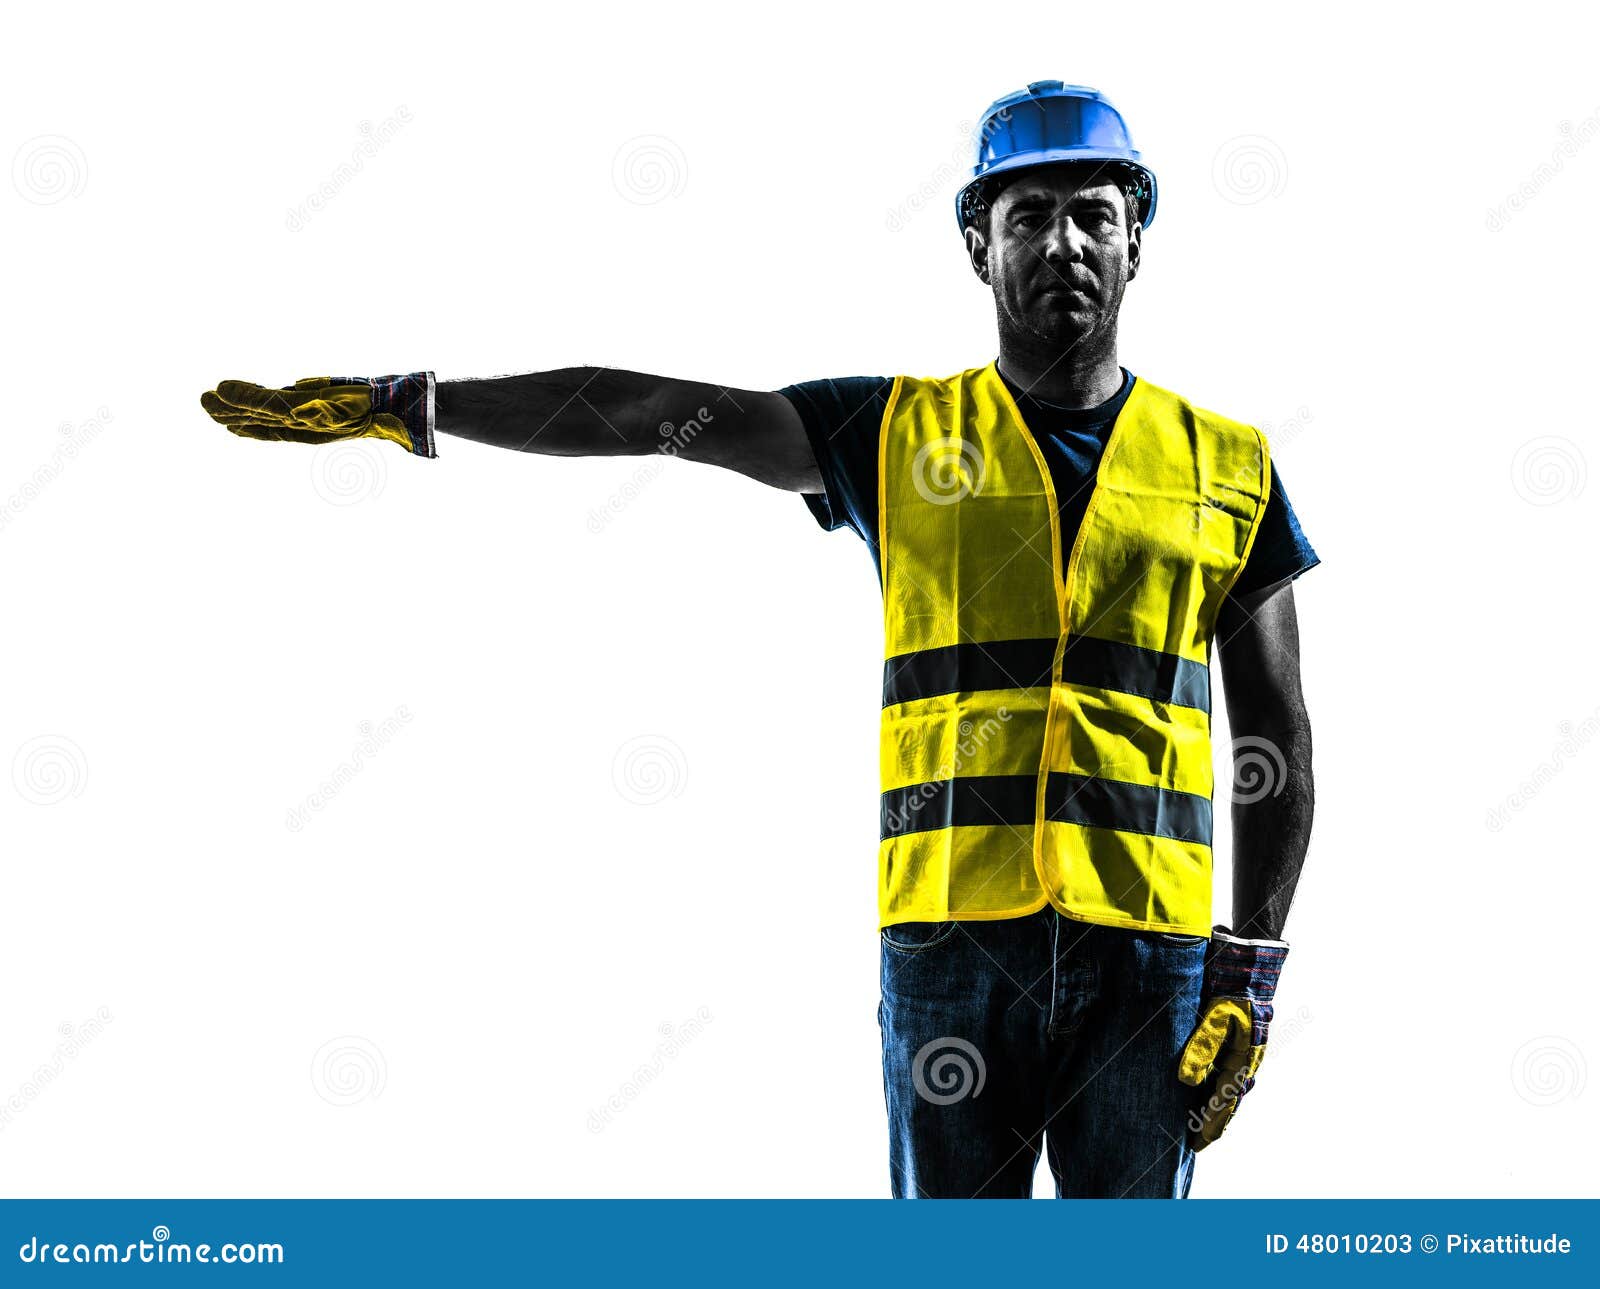 construction worker signaling safety vest silhouette